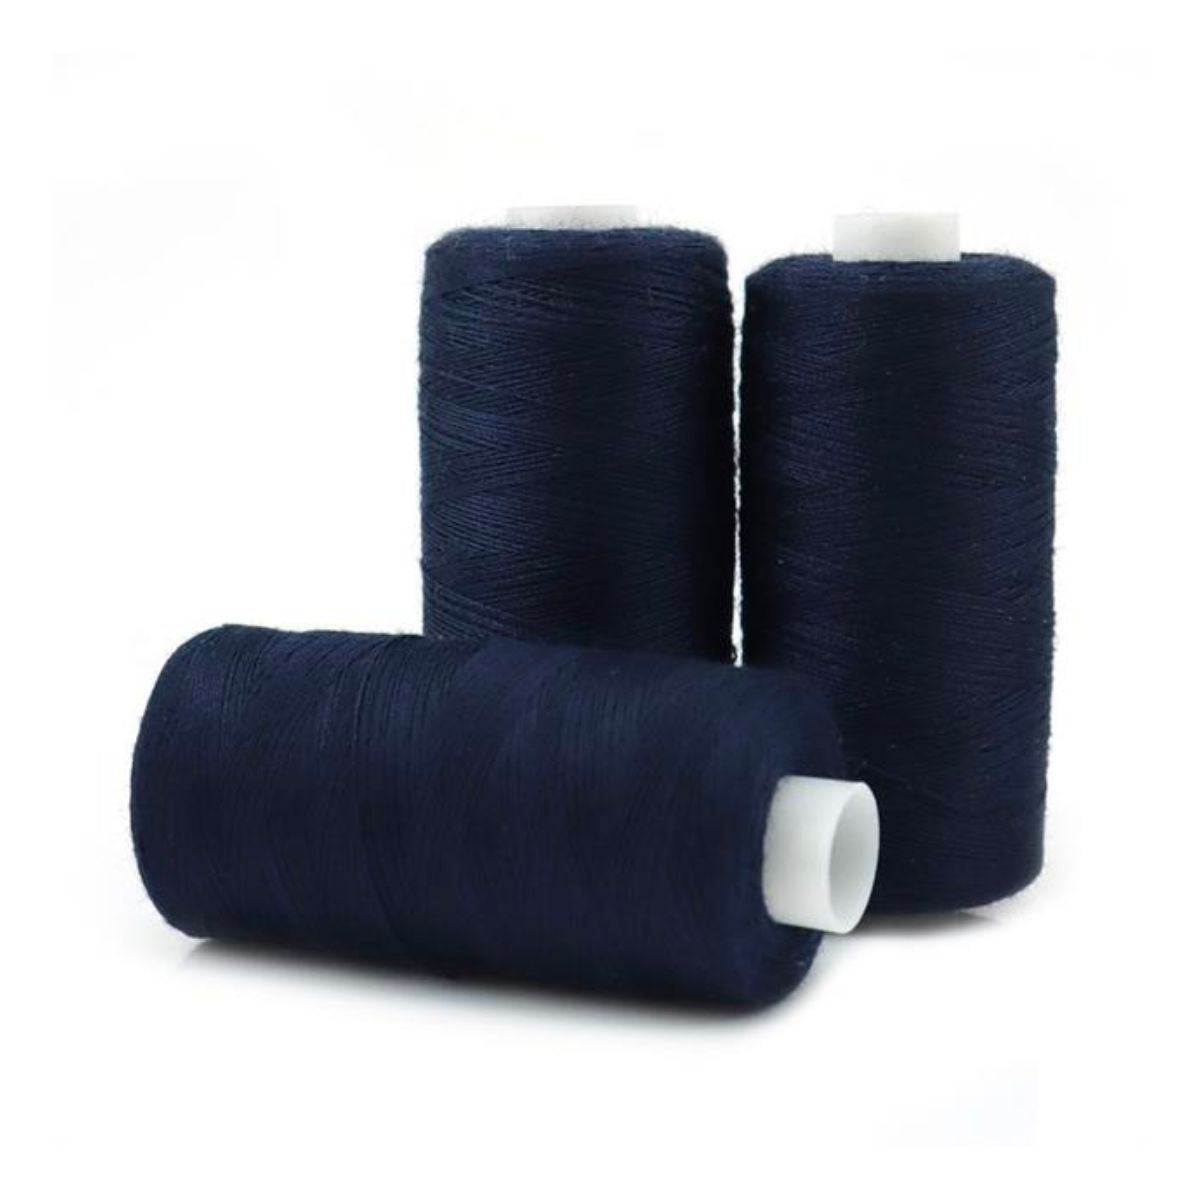 Sewing thread pack 500 x3 navy Blue